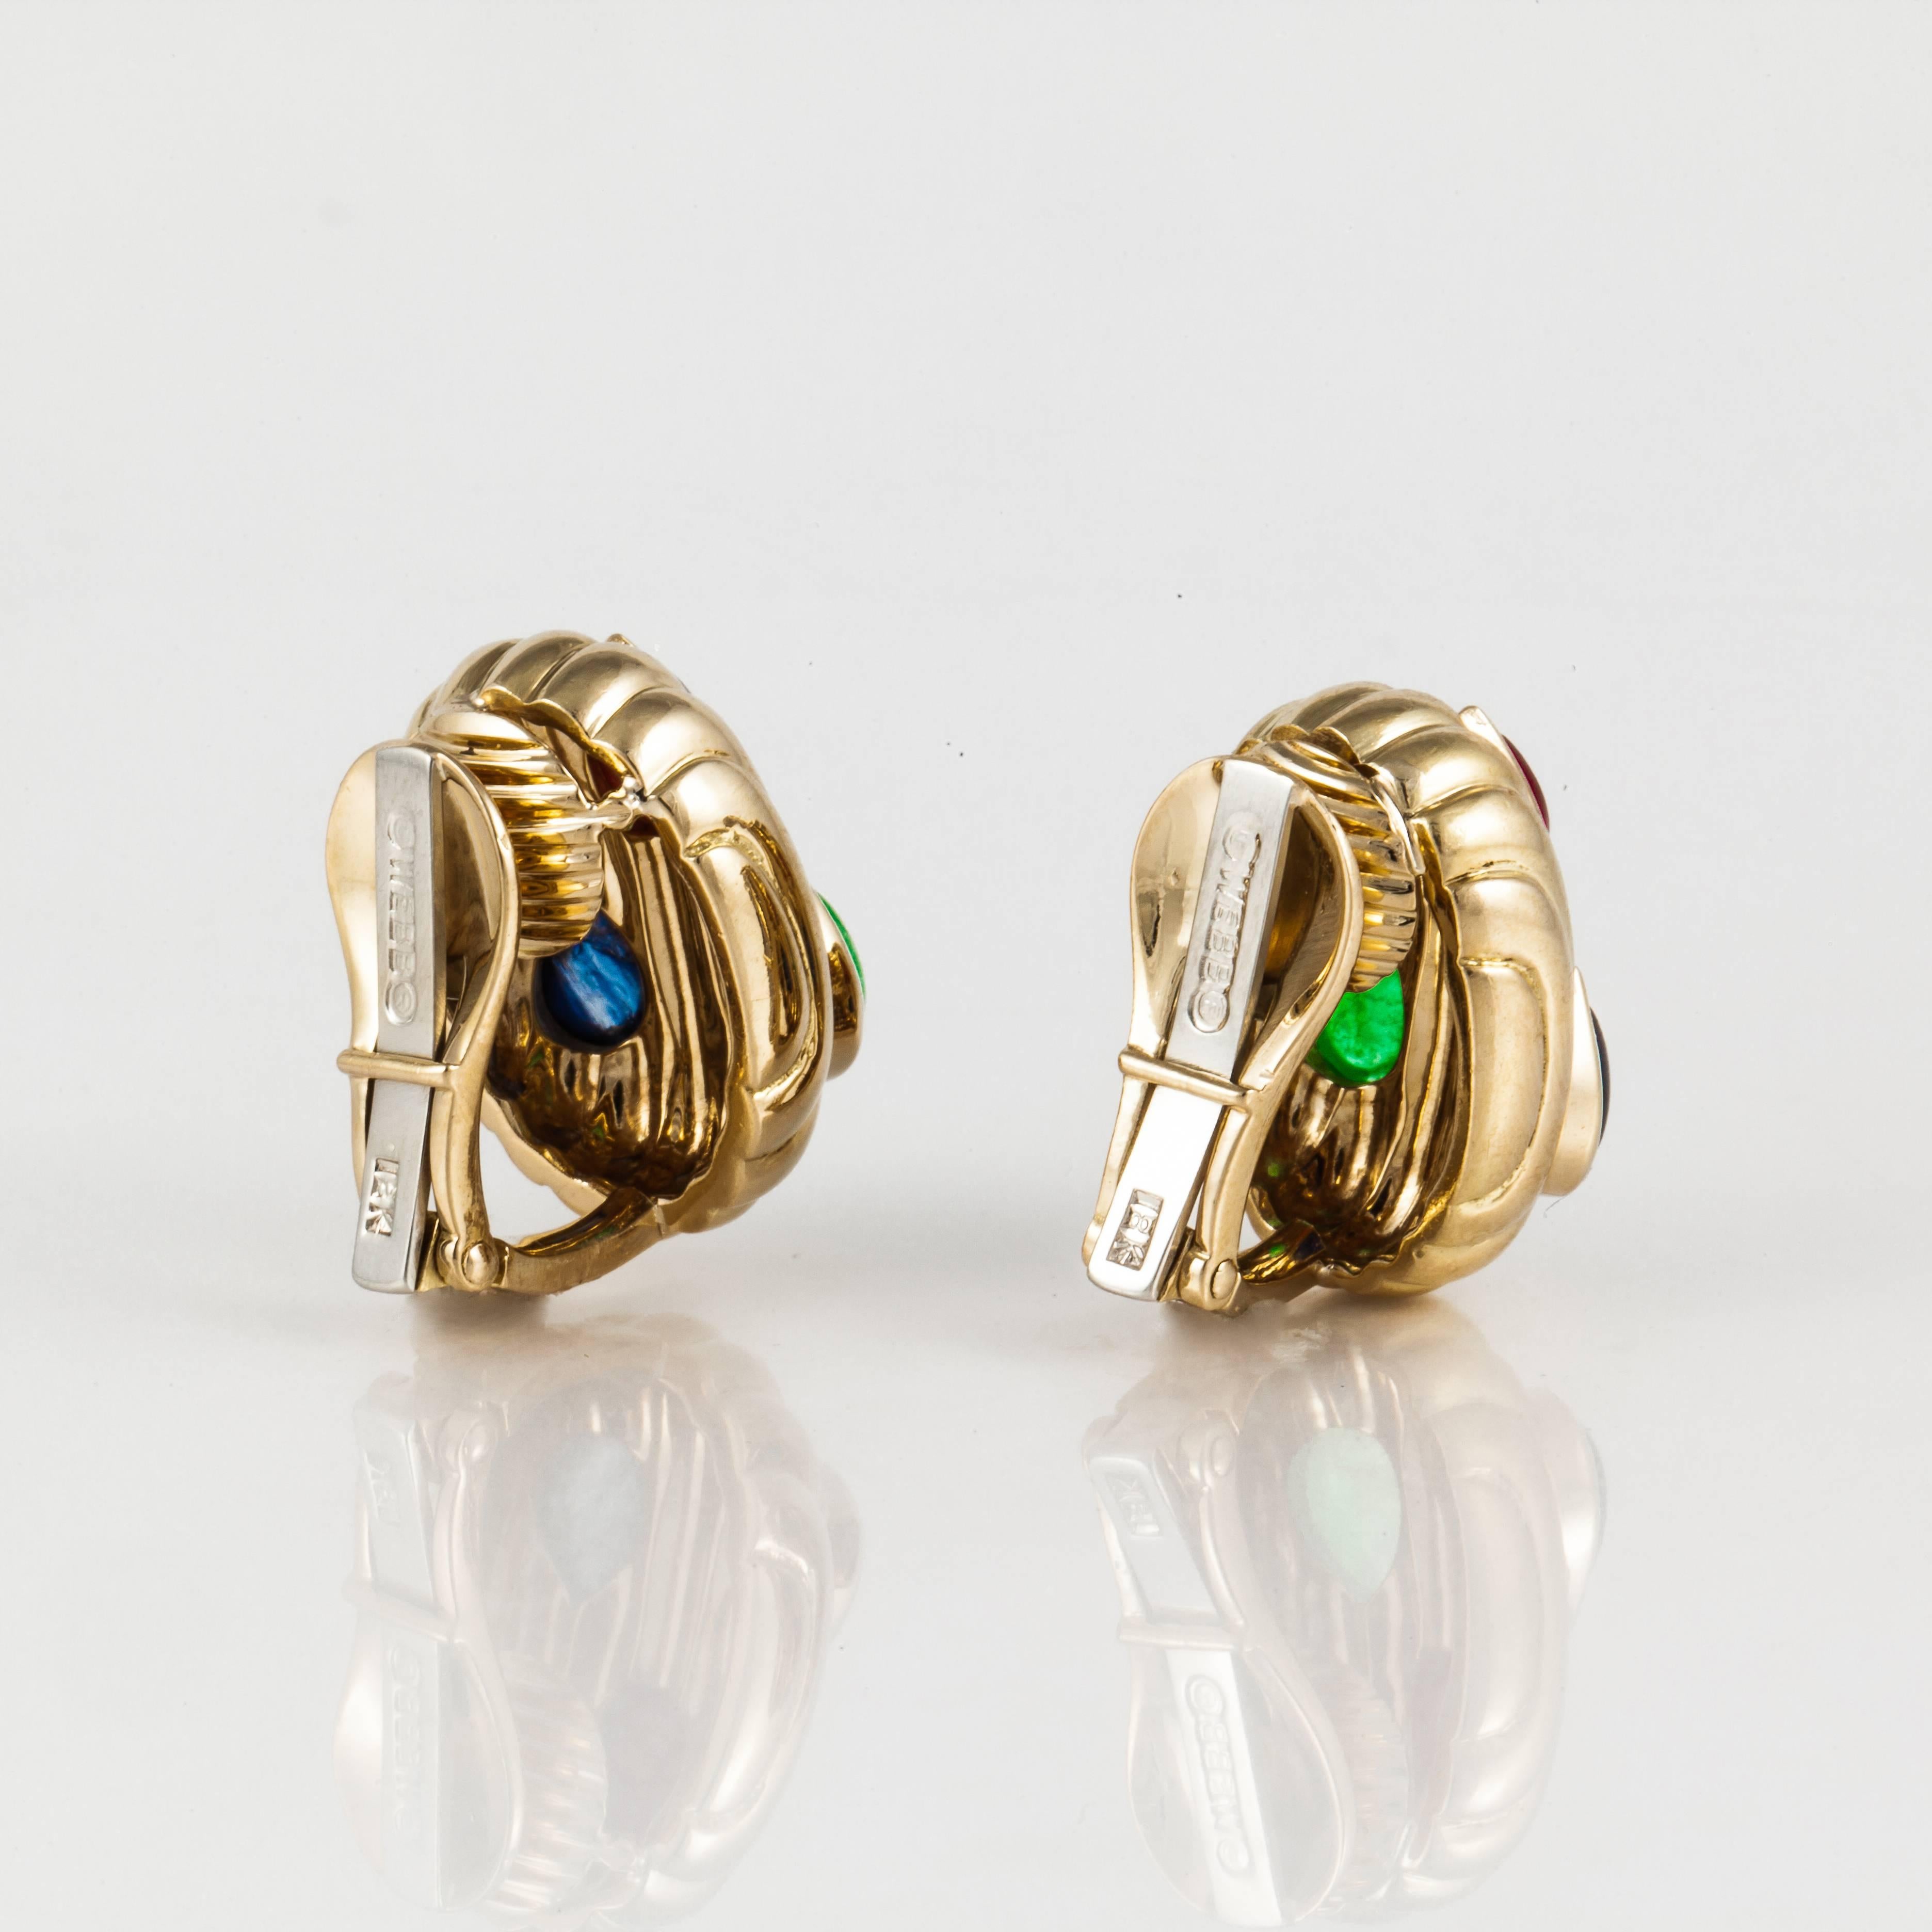 Cabochon David Webb Sapphire Ruby and Emerald Earrings in 18K Gold